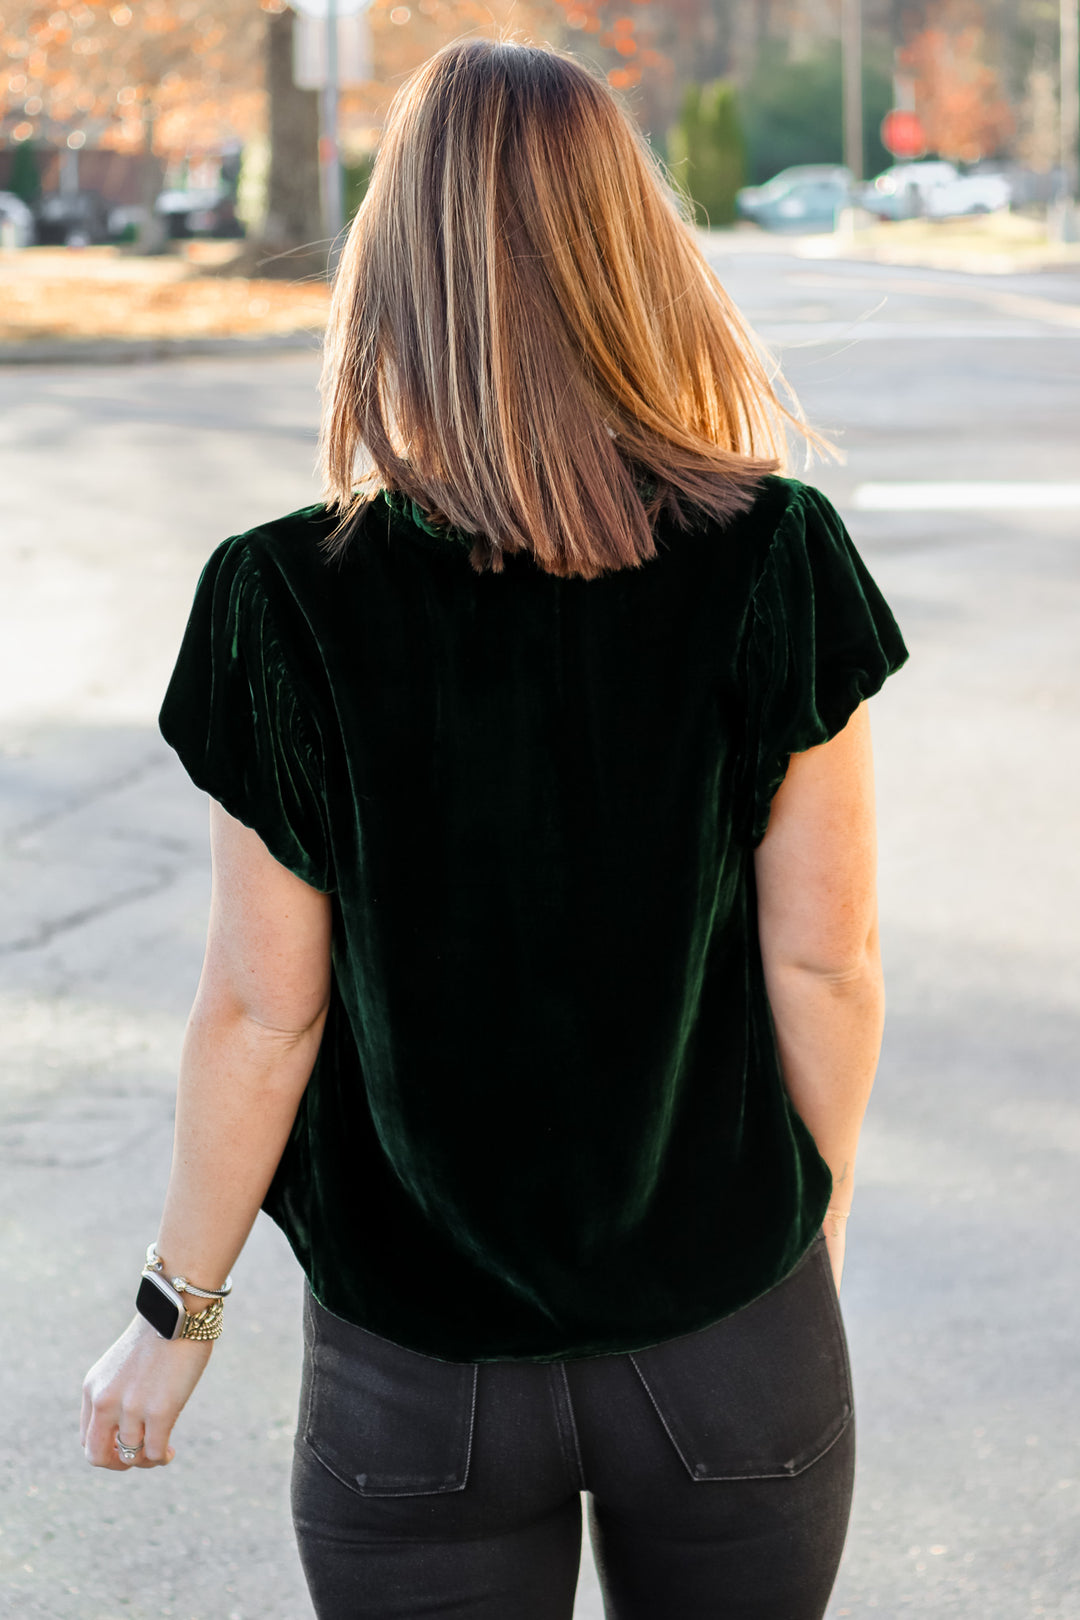 A brunette woman standing outside wearing a dark green velvet top with tie collar, short sleeves and black jeans. She is rear facing.